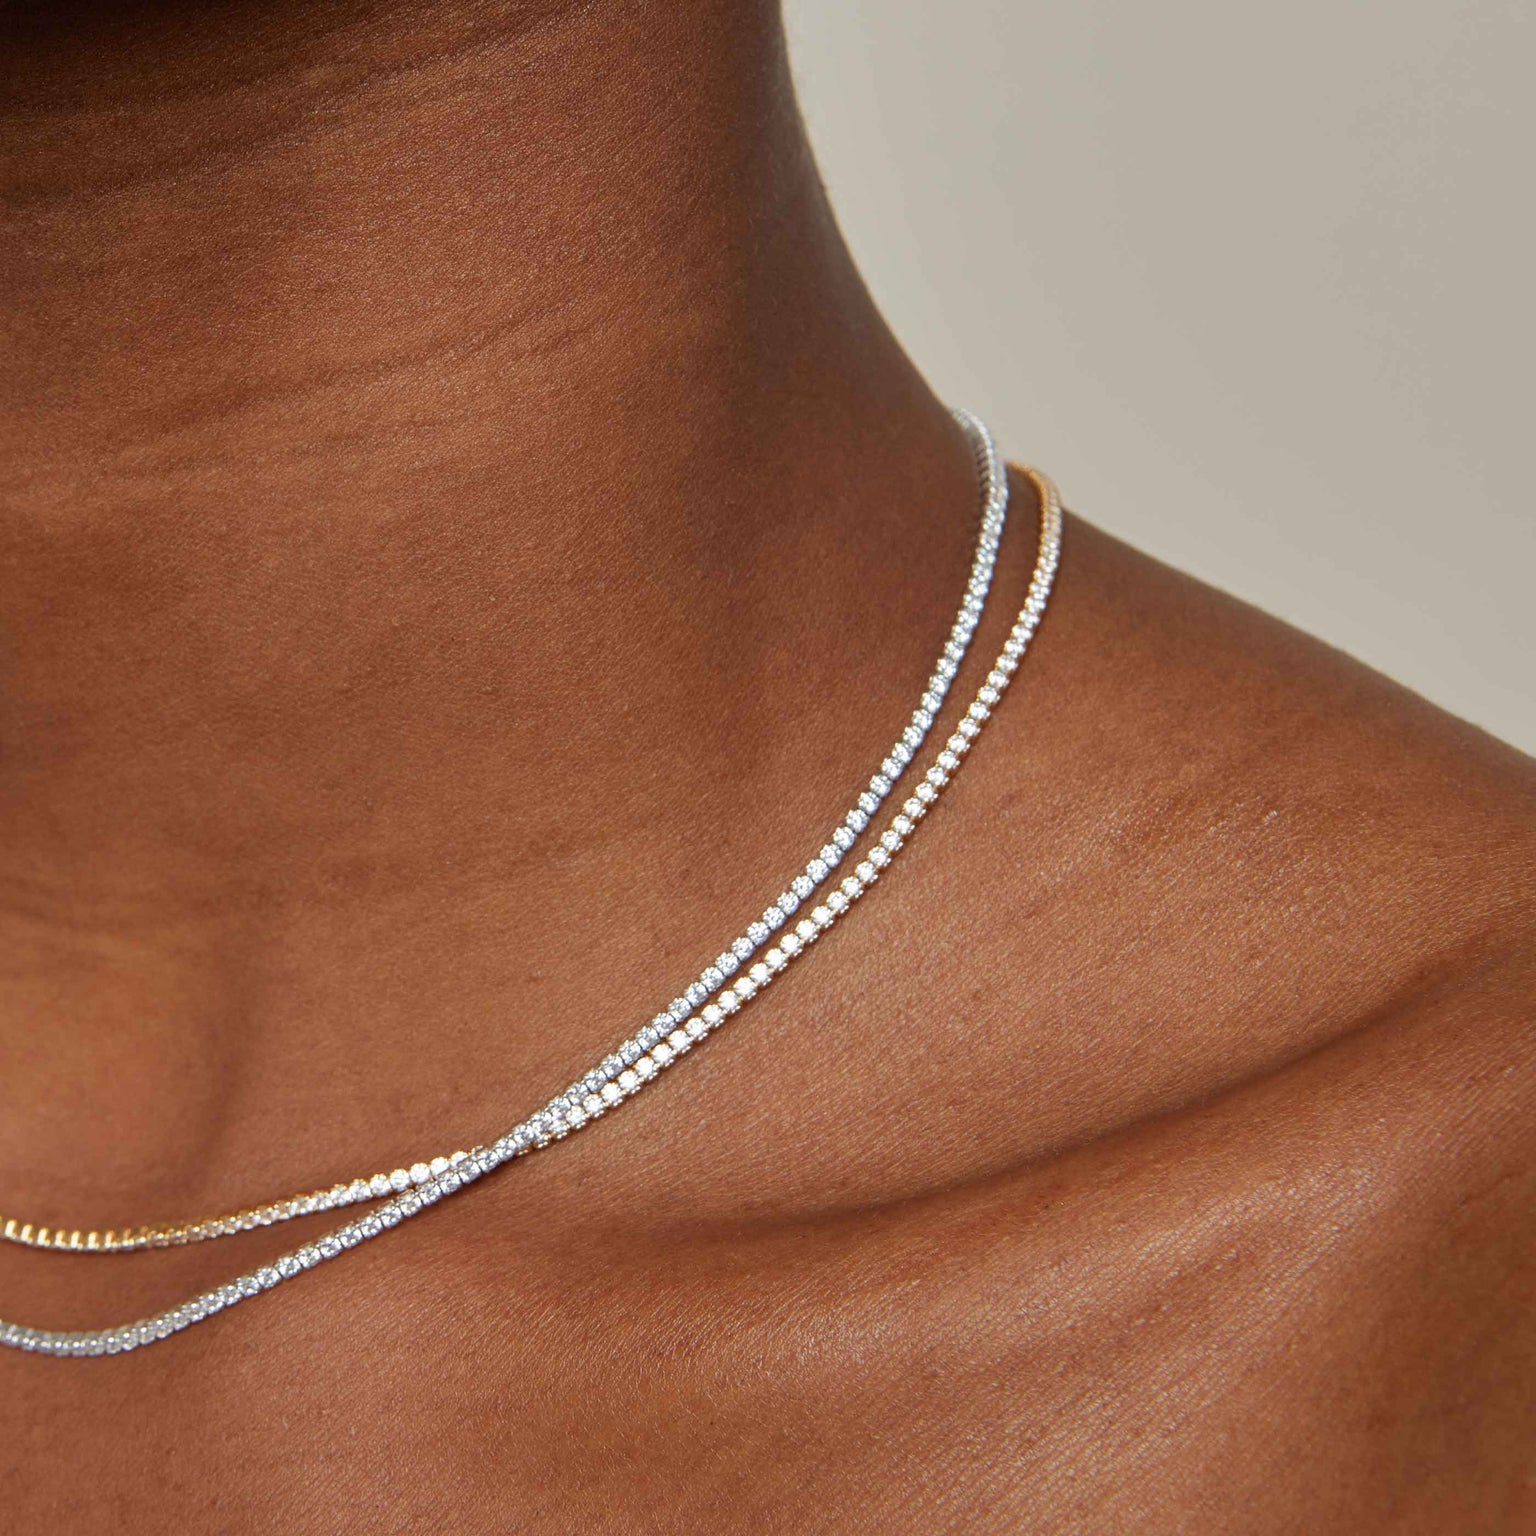 Tennis Chain Necklace in Gold layered with Tennis Chain Necklace in Silver